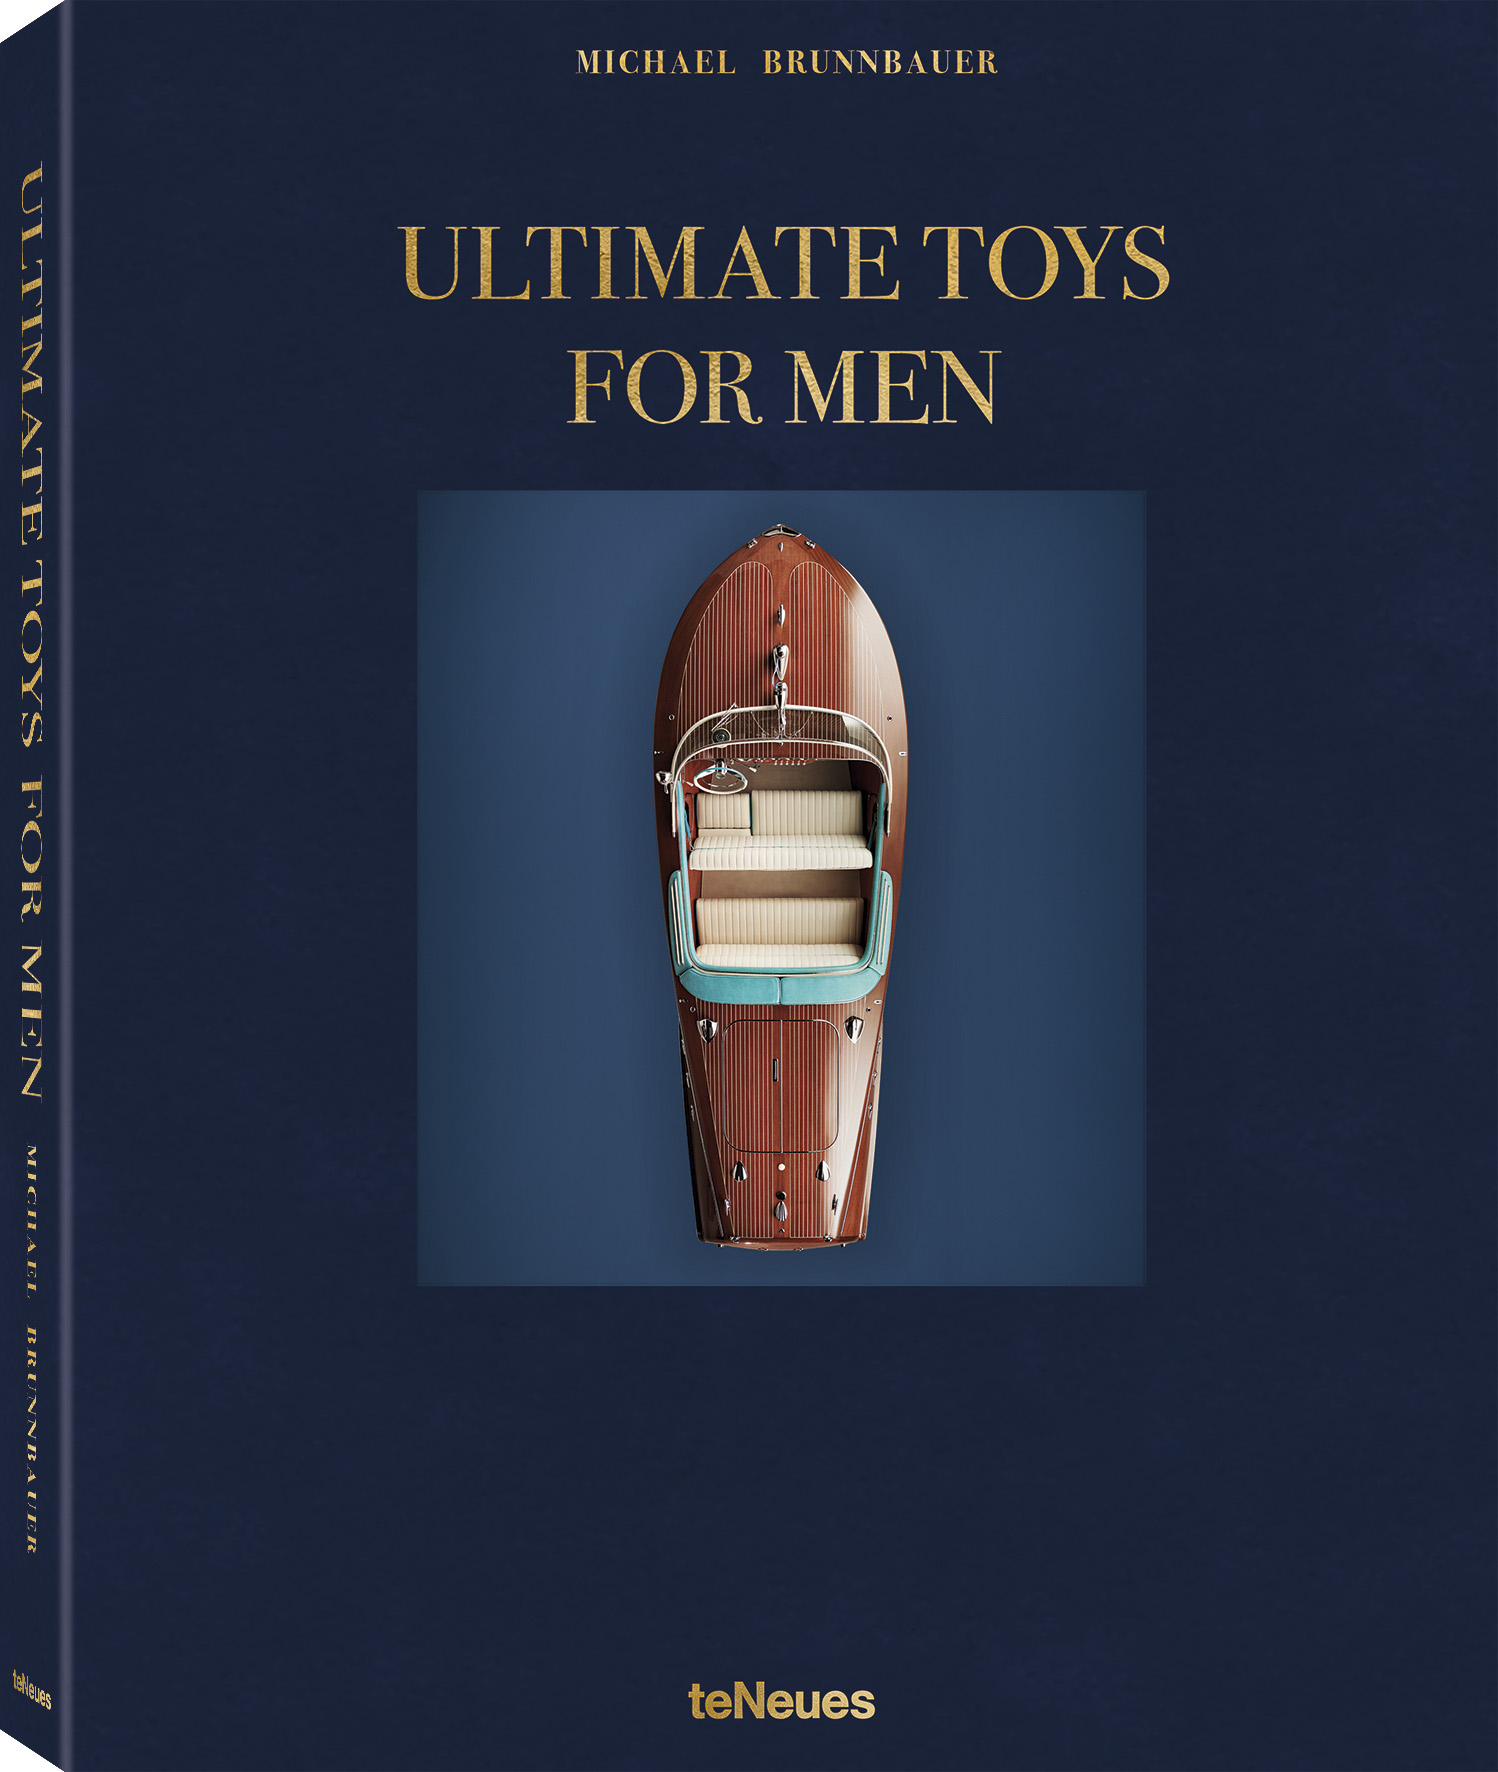 ultimate toys for men book